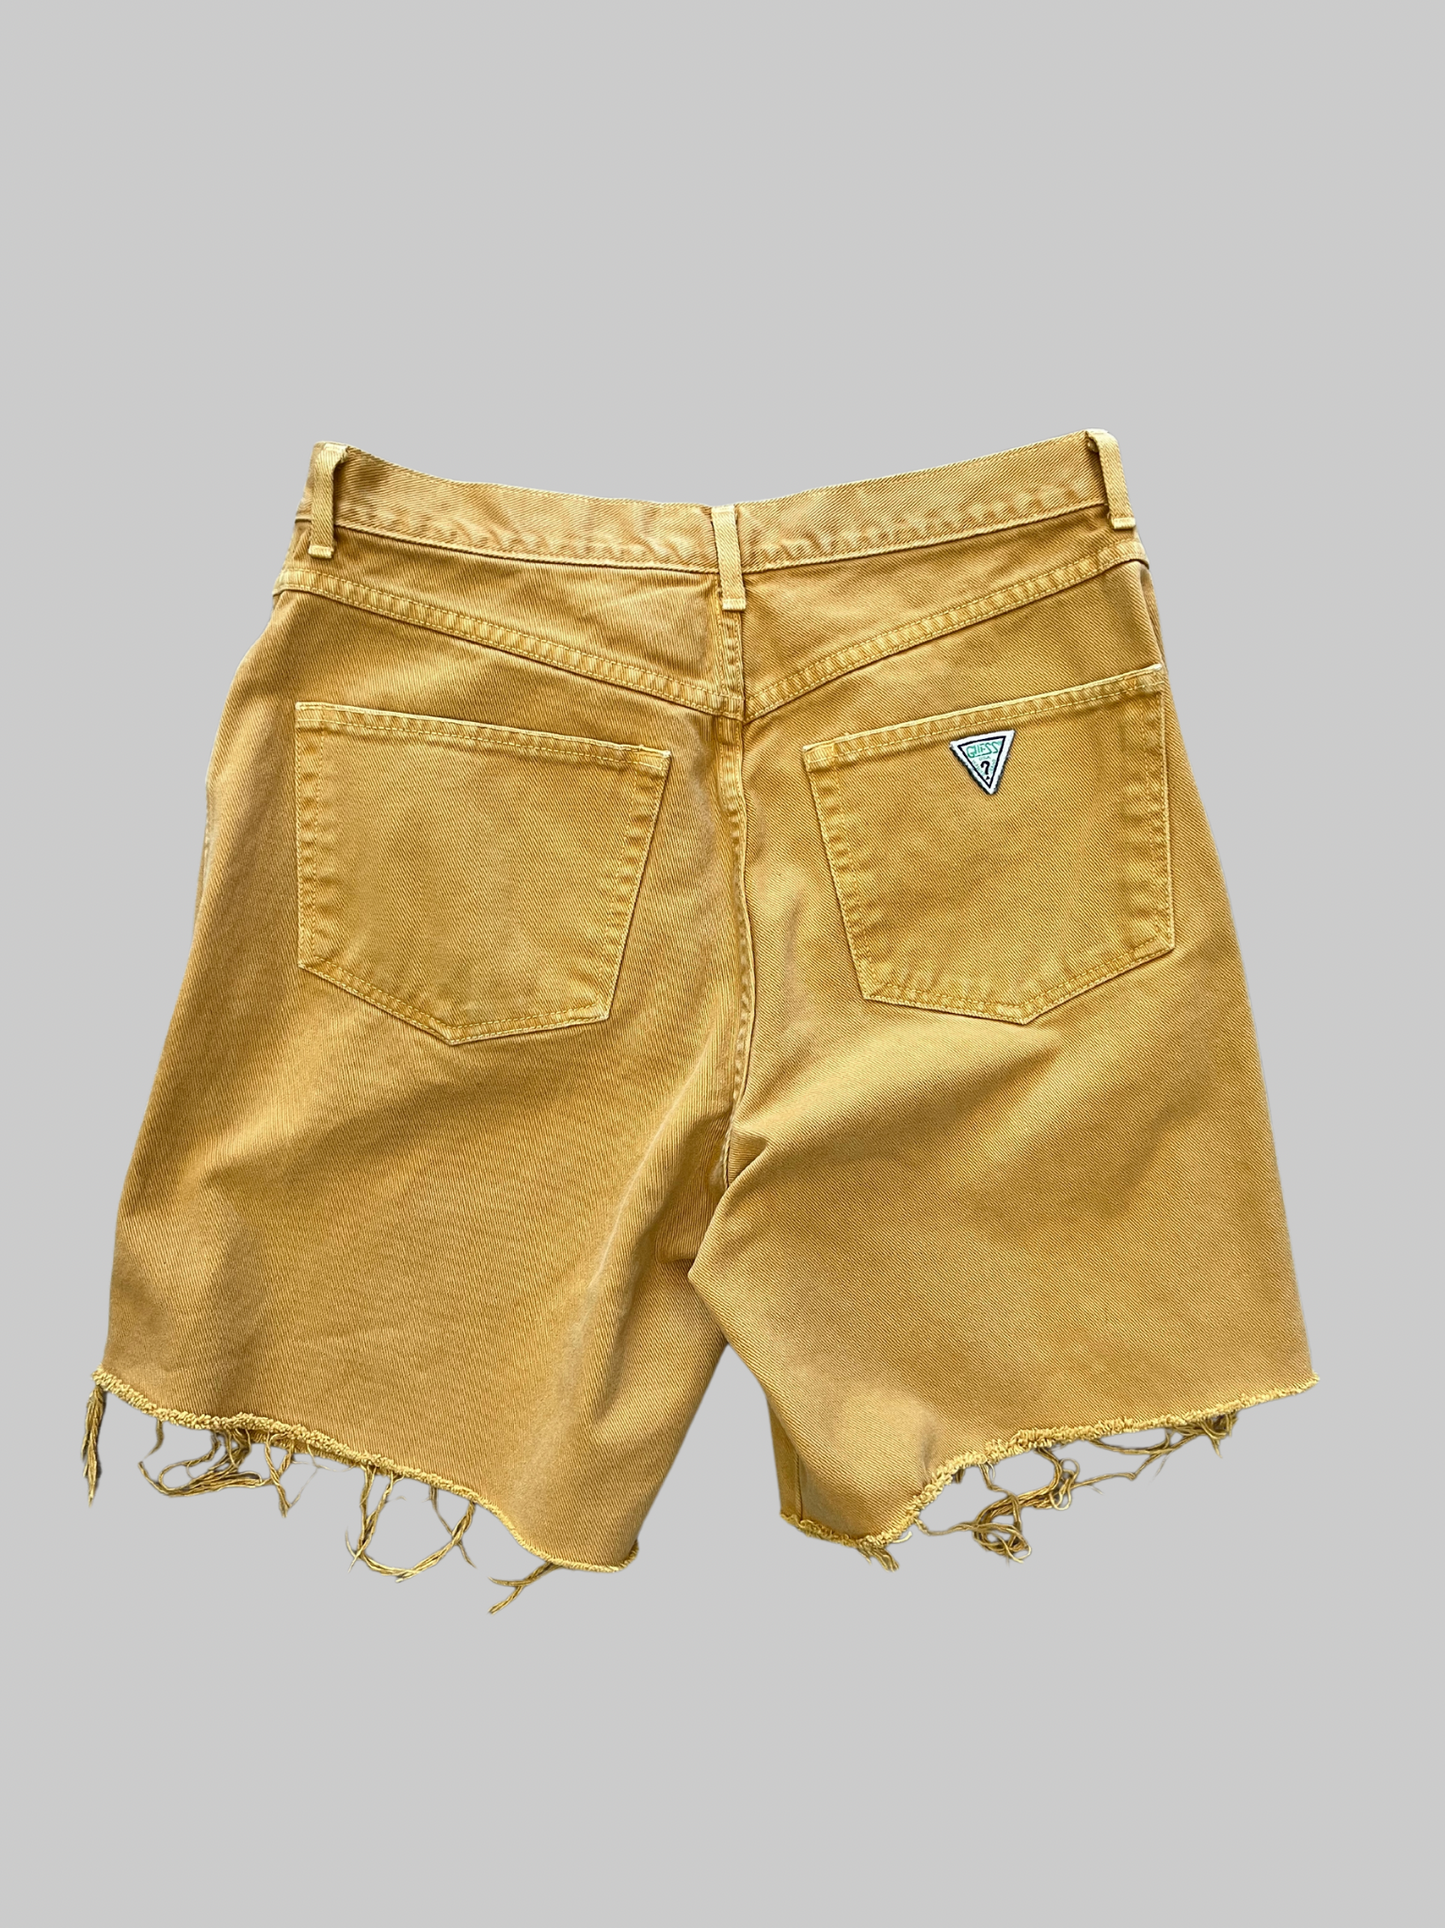 Gold 90’s Guess Cut Off Jean Shorts (31)